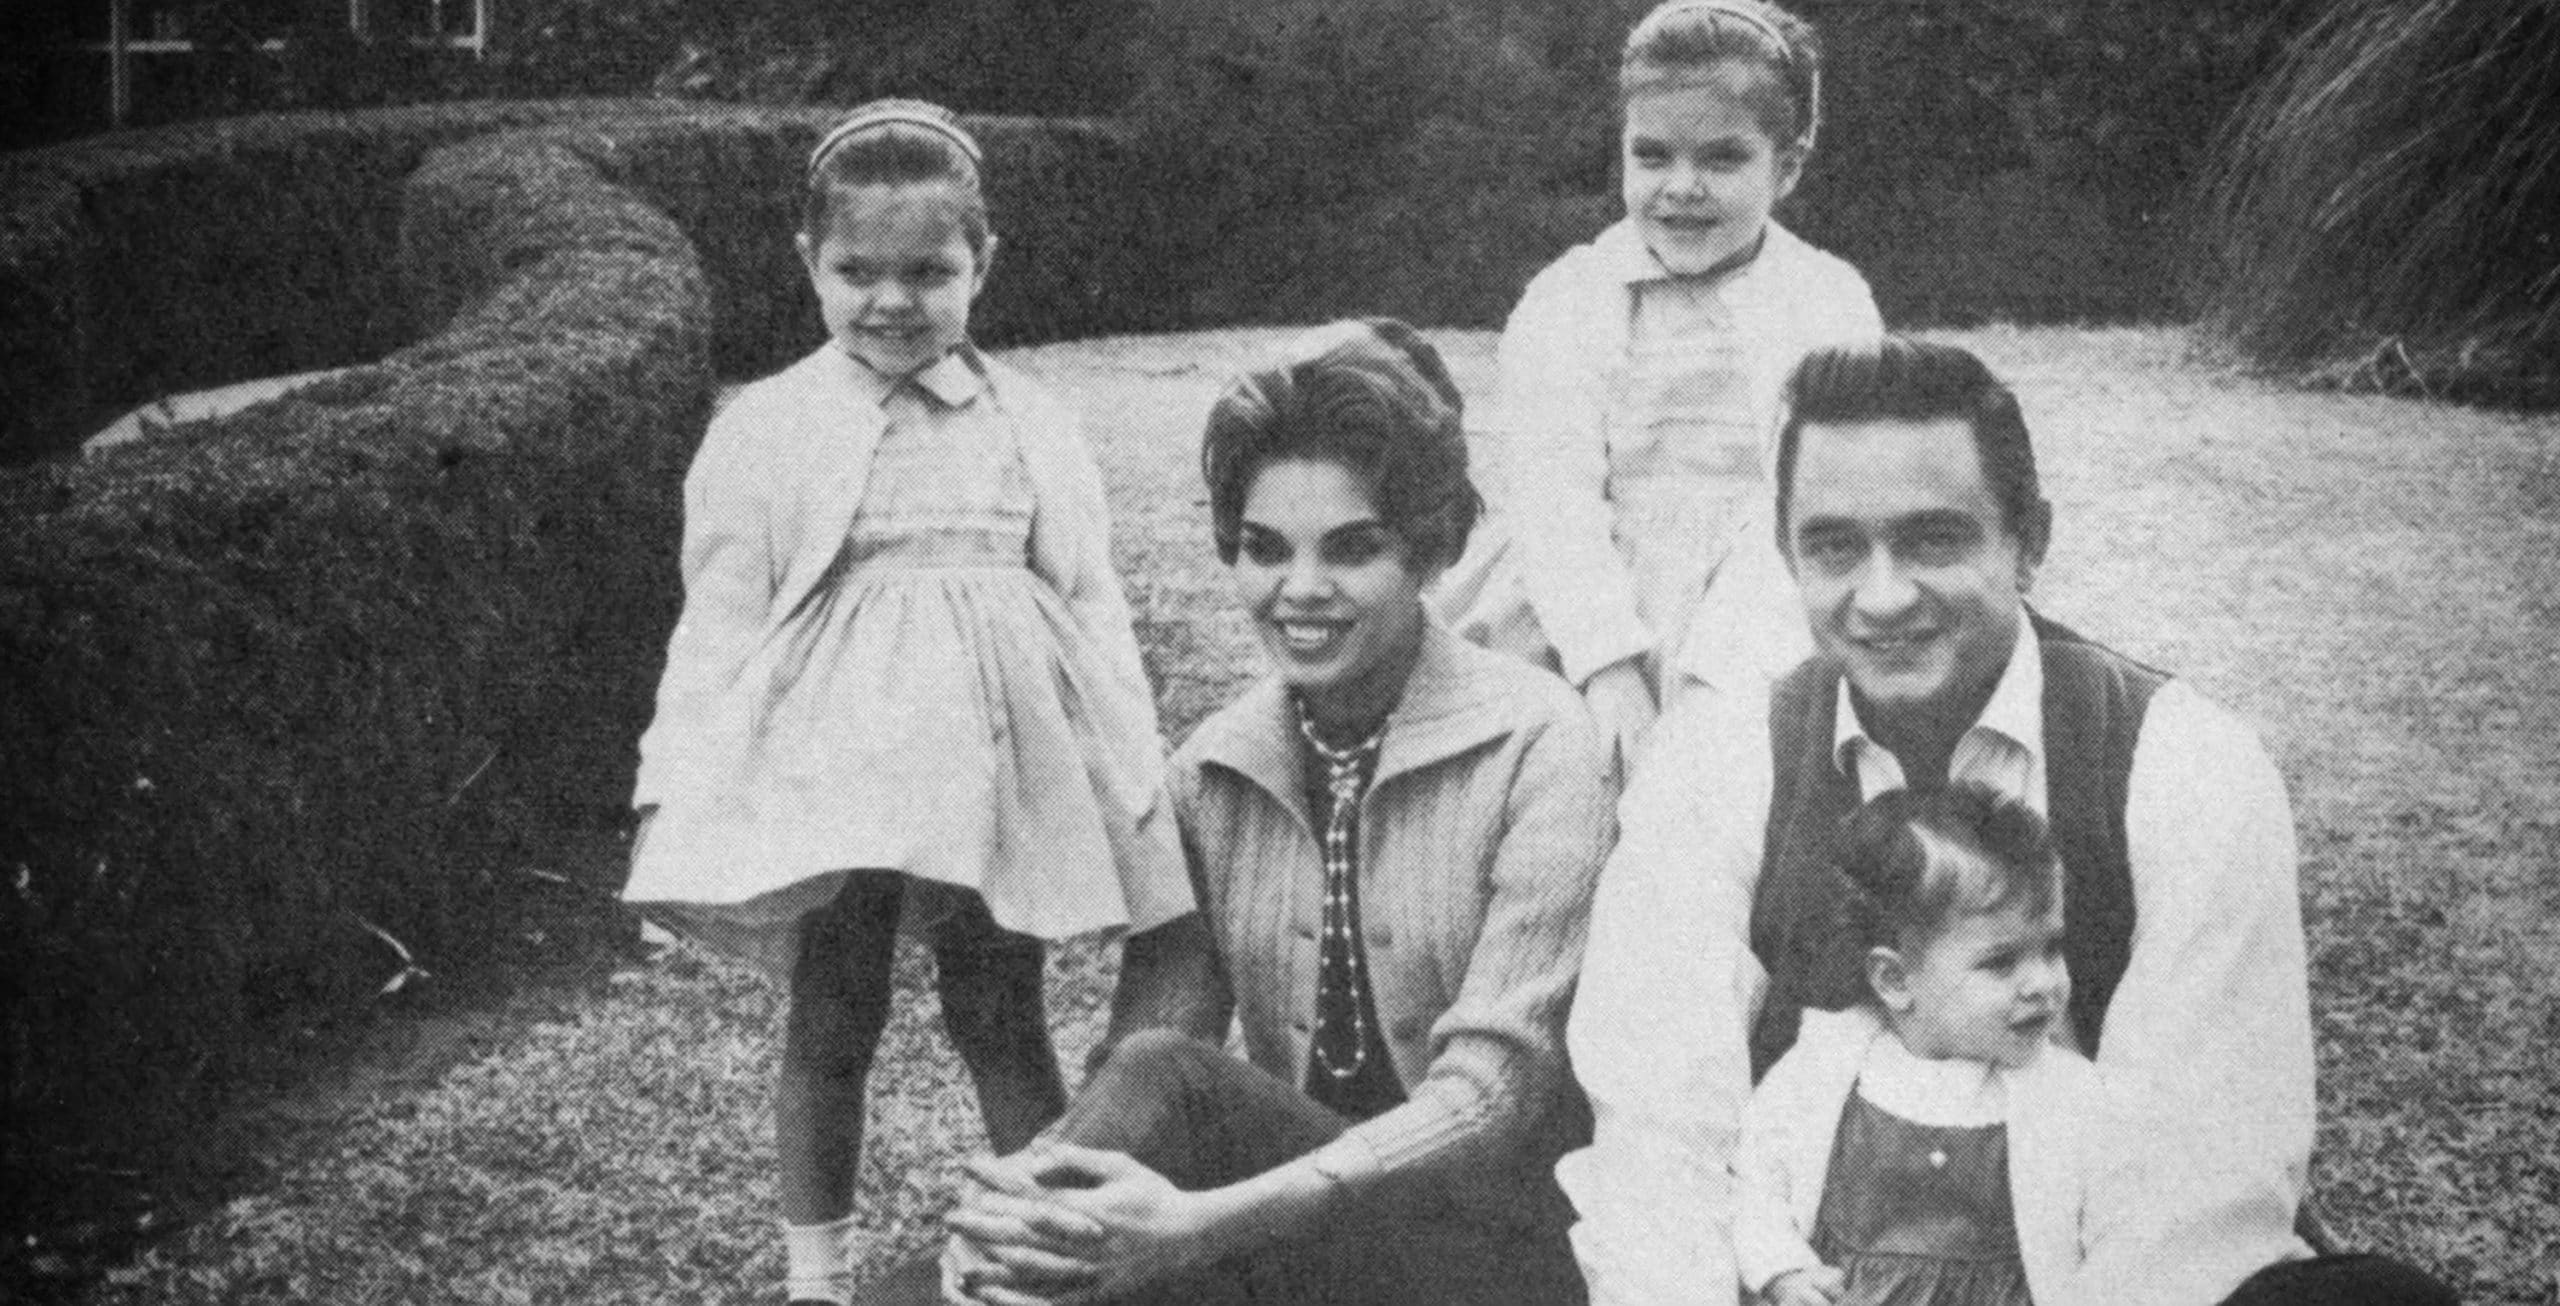 MY DARLING VIVIAN, Vivian Liberto Cash and Johnny Cash with their daughters, from left: Kathy, Rosanne, Cindy, 1958 Encino, California, 2020